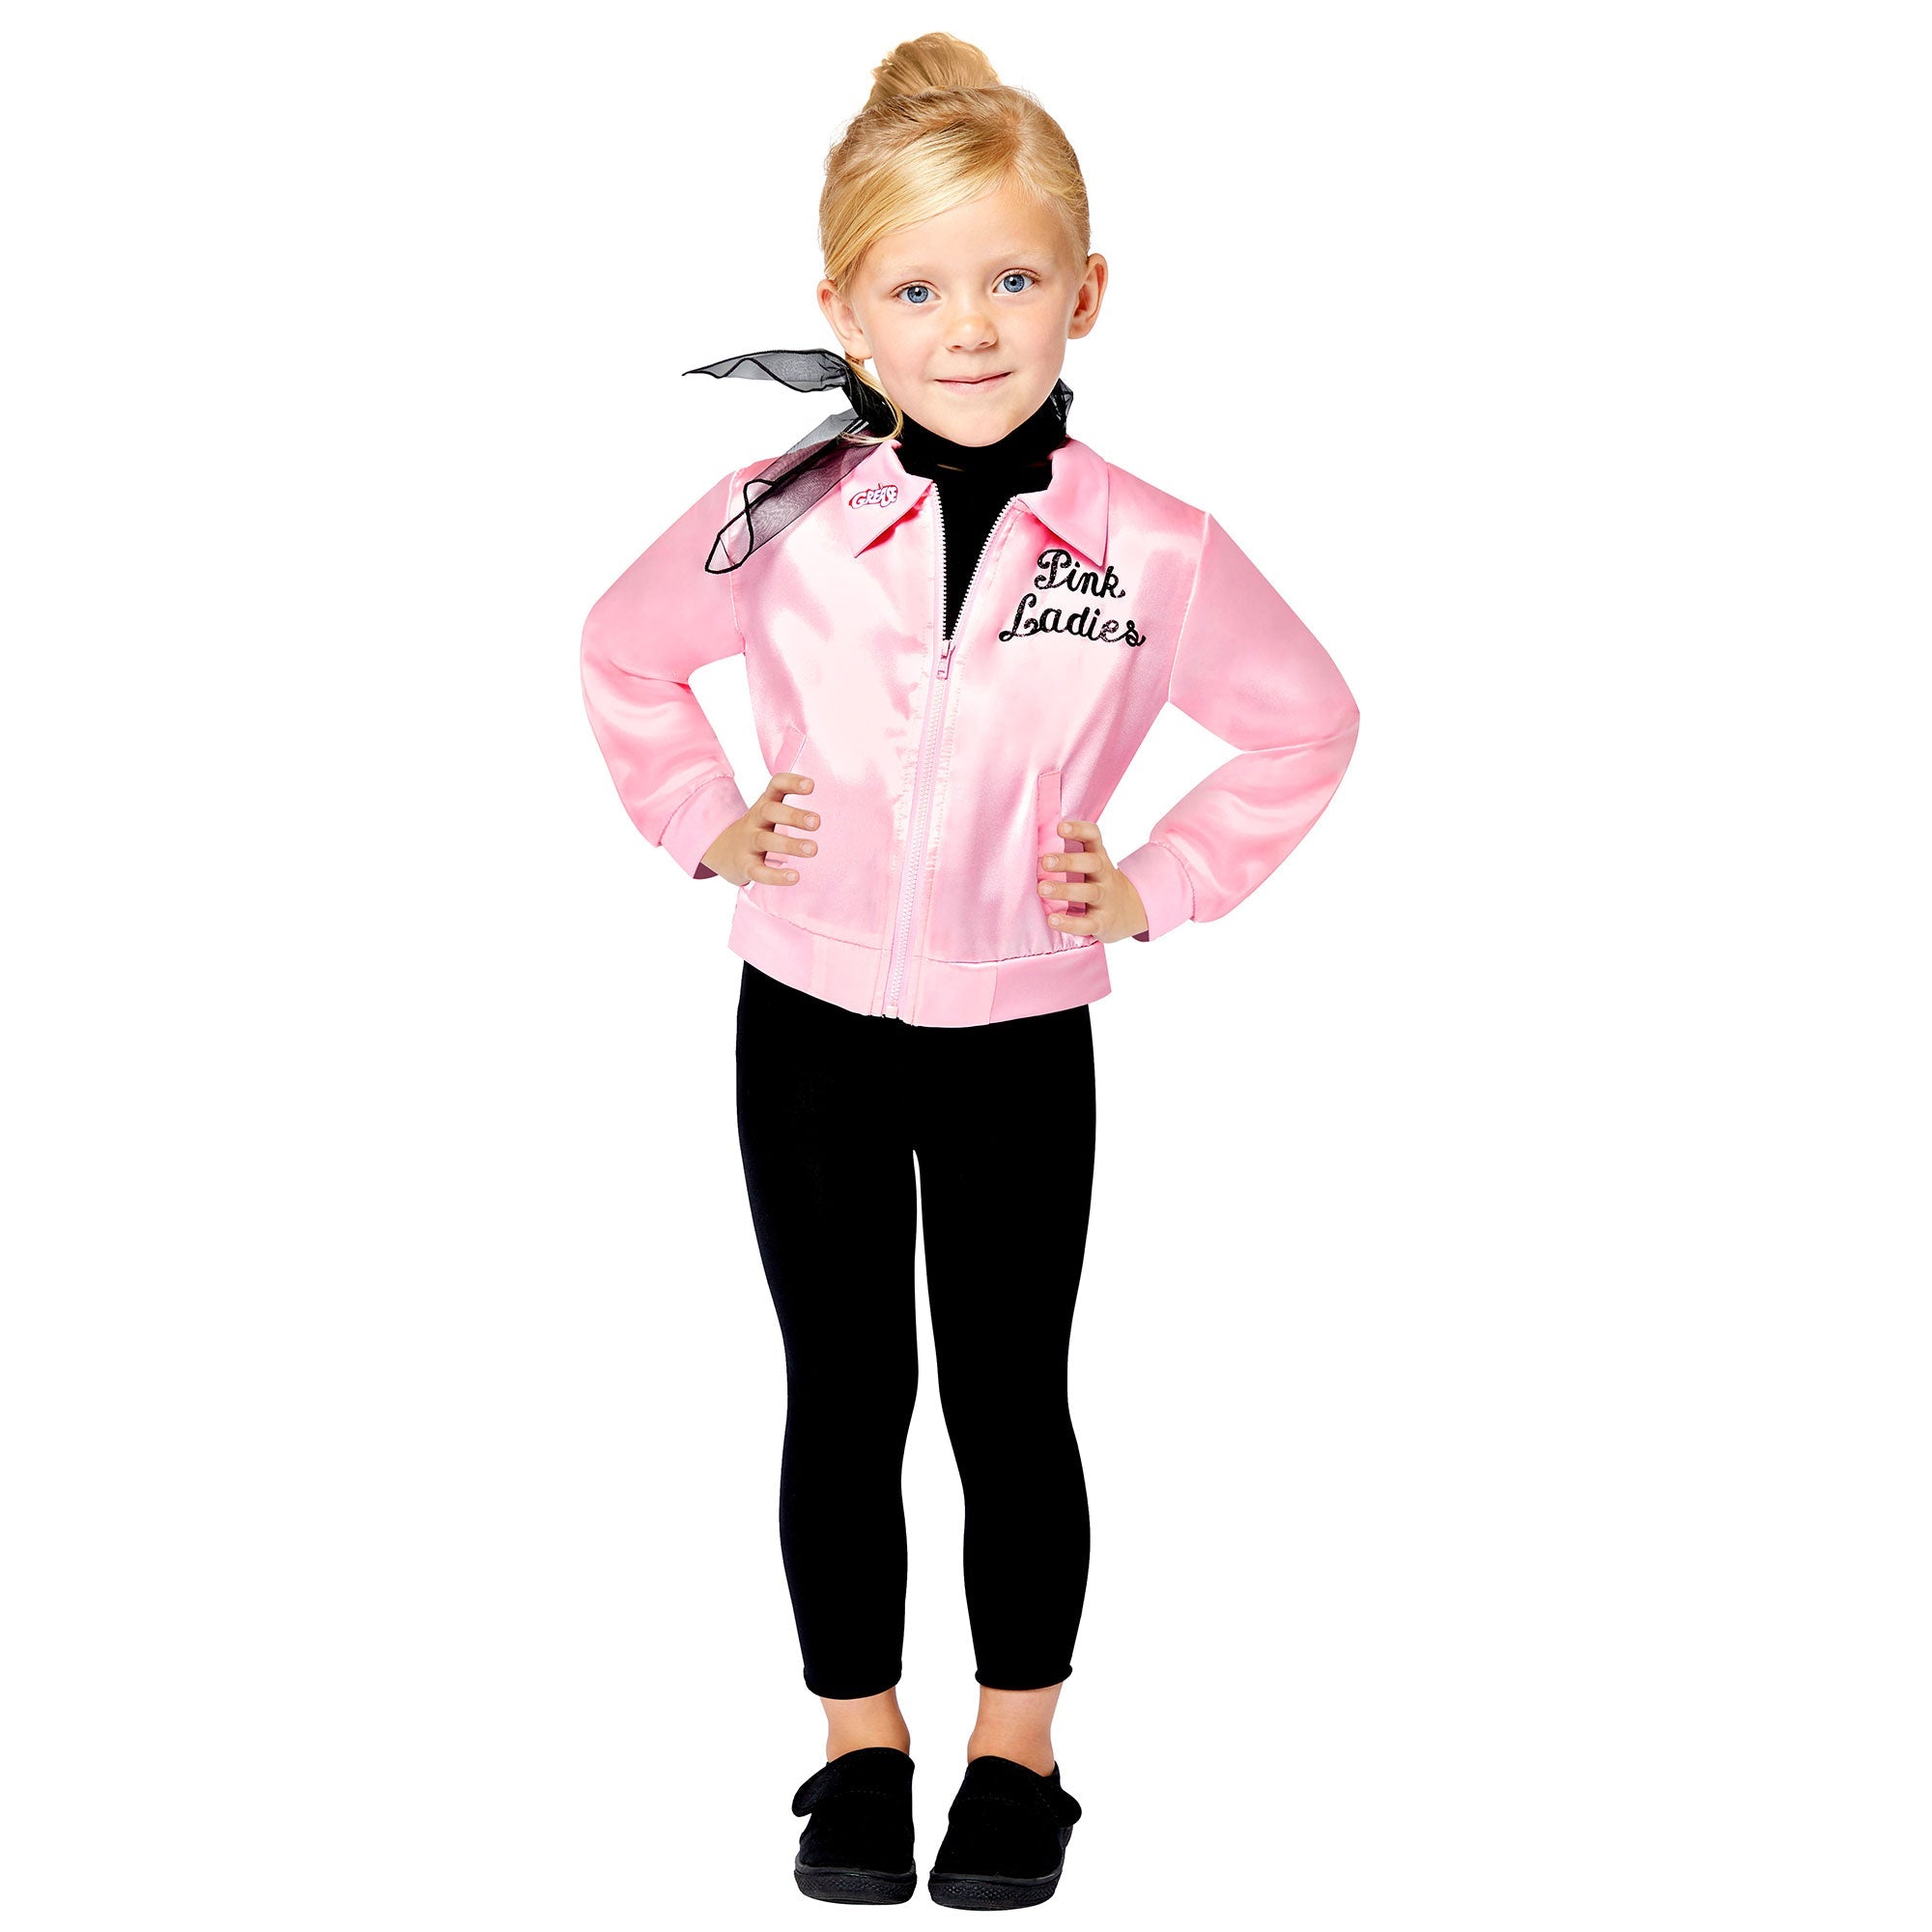 Costume Grease Pink Lady Jacket Only - Child